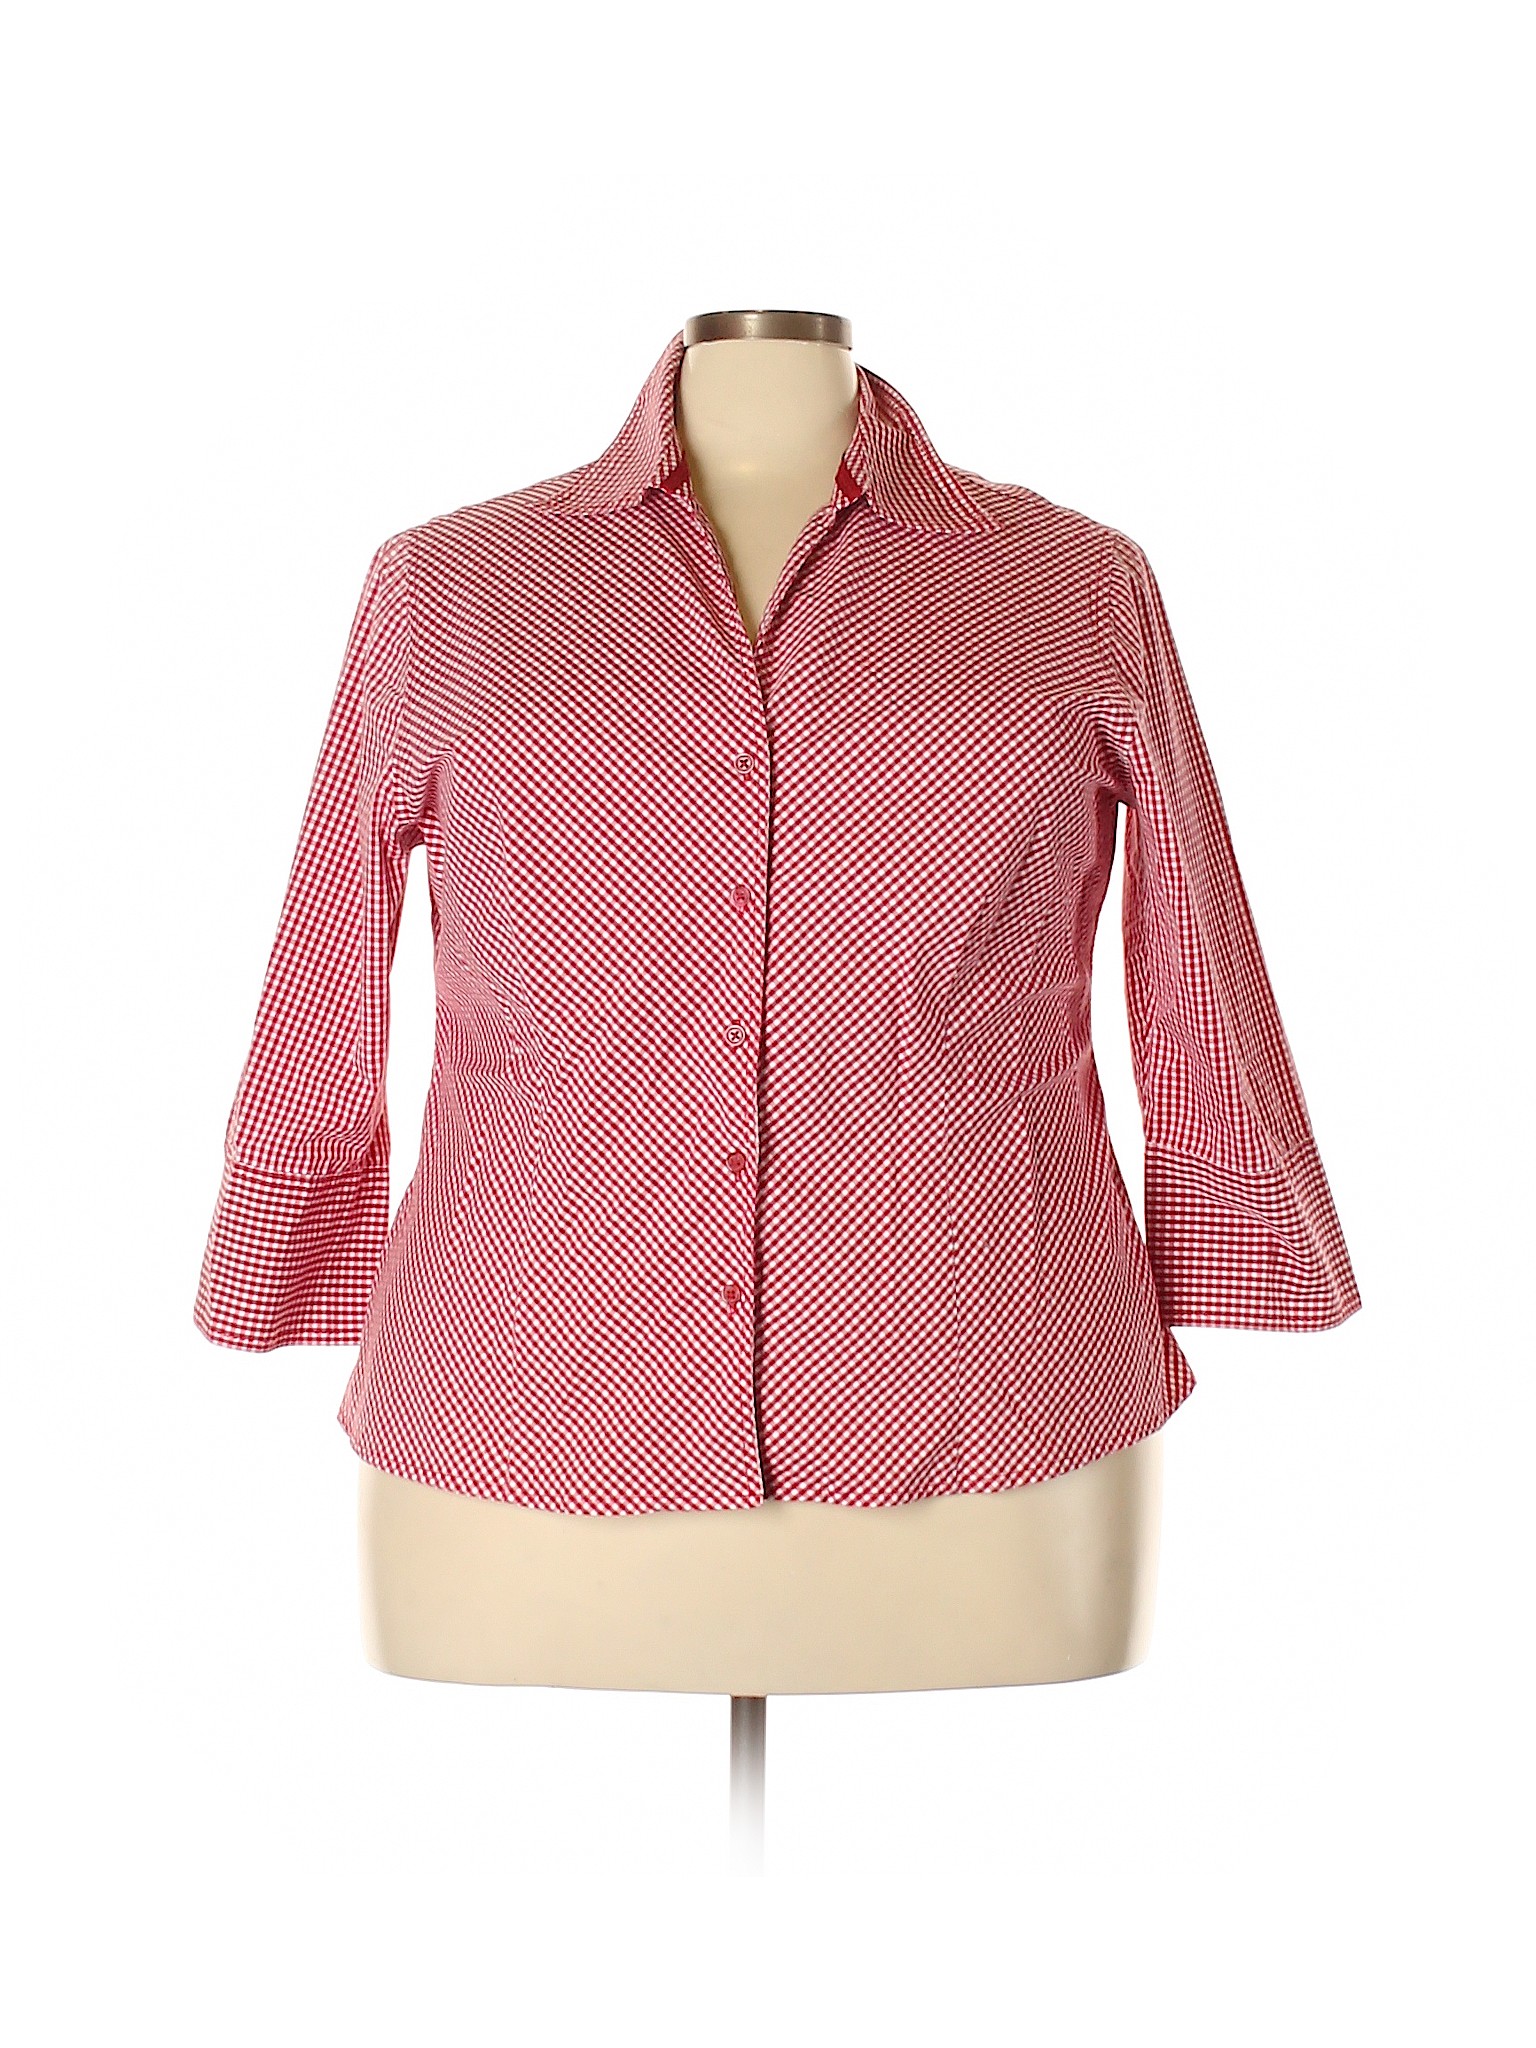 Cato Print Red 3/4 Sleeve Button-Down Shirt Size 22 (Plus) - 72% off ...